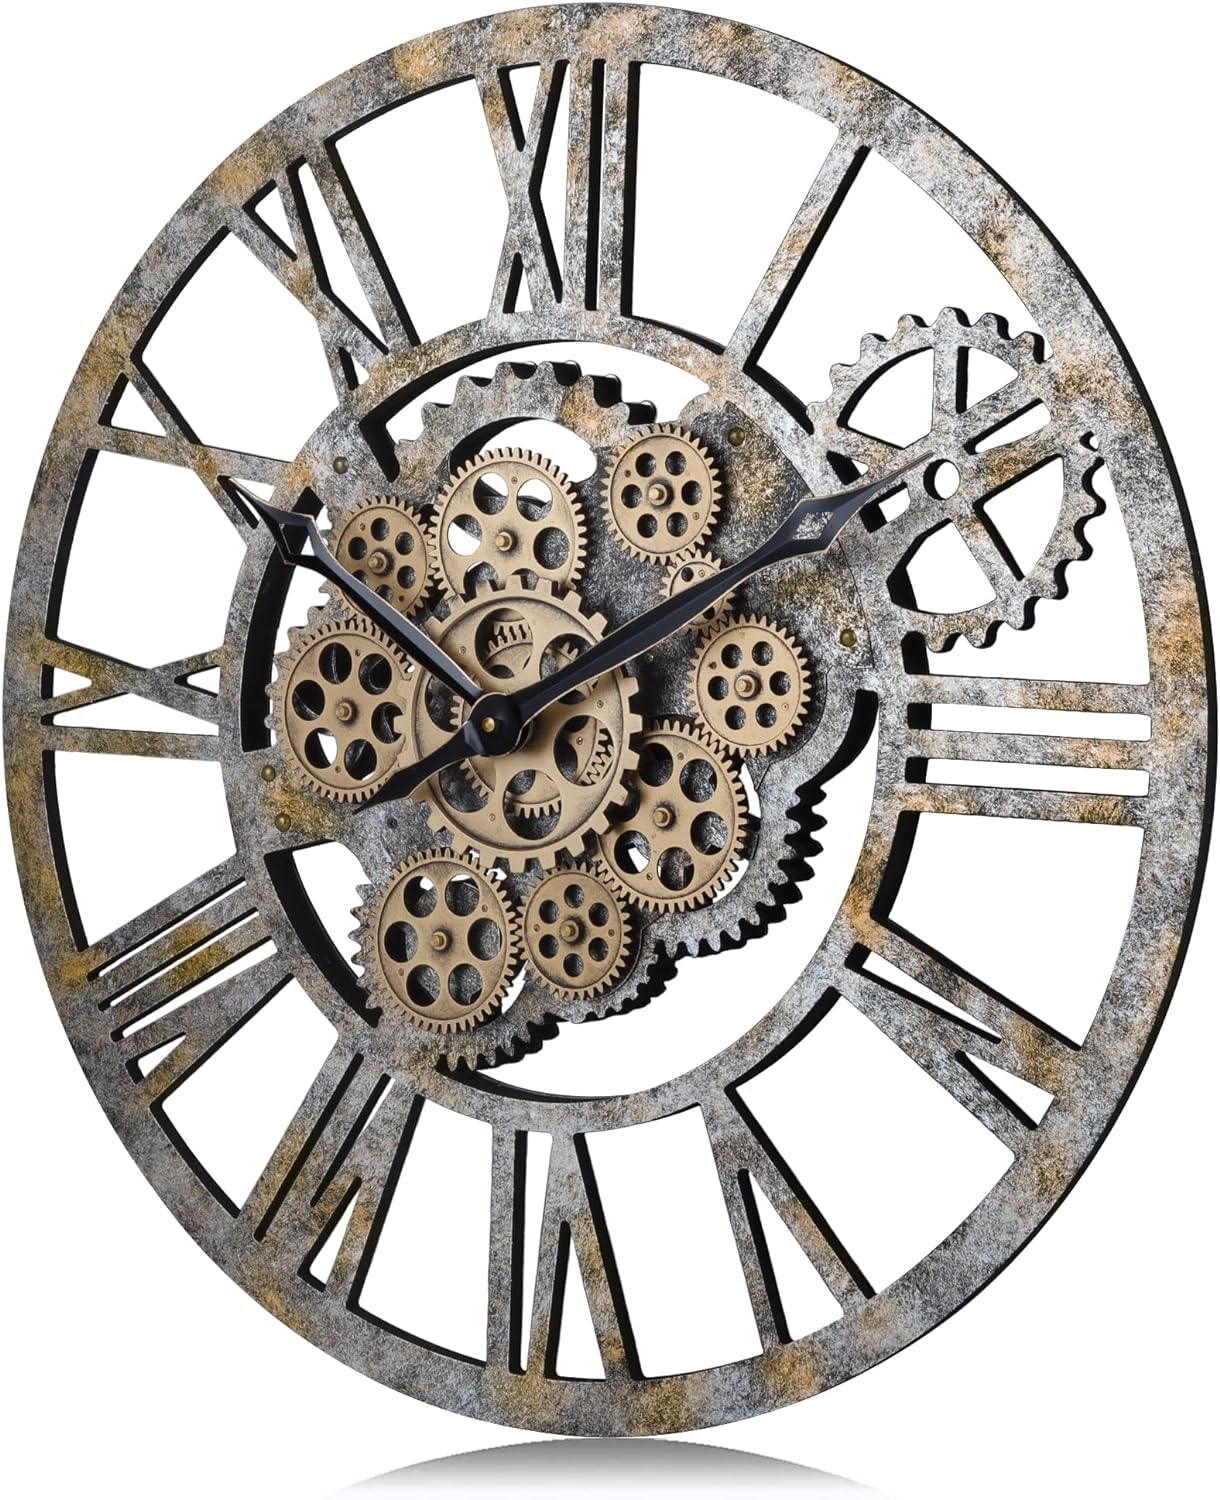 Large Authentic Steampunk Clock